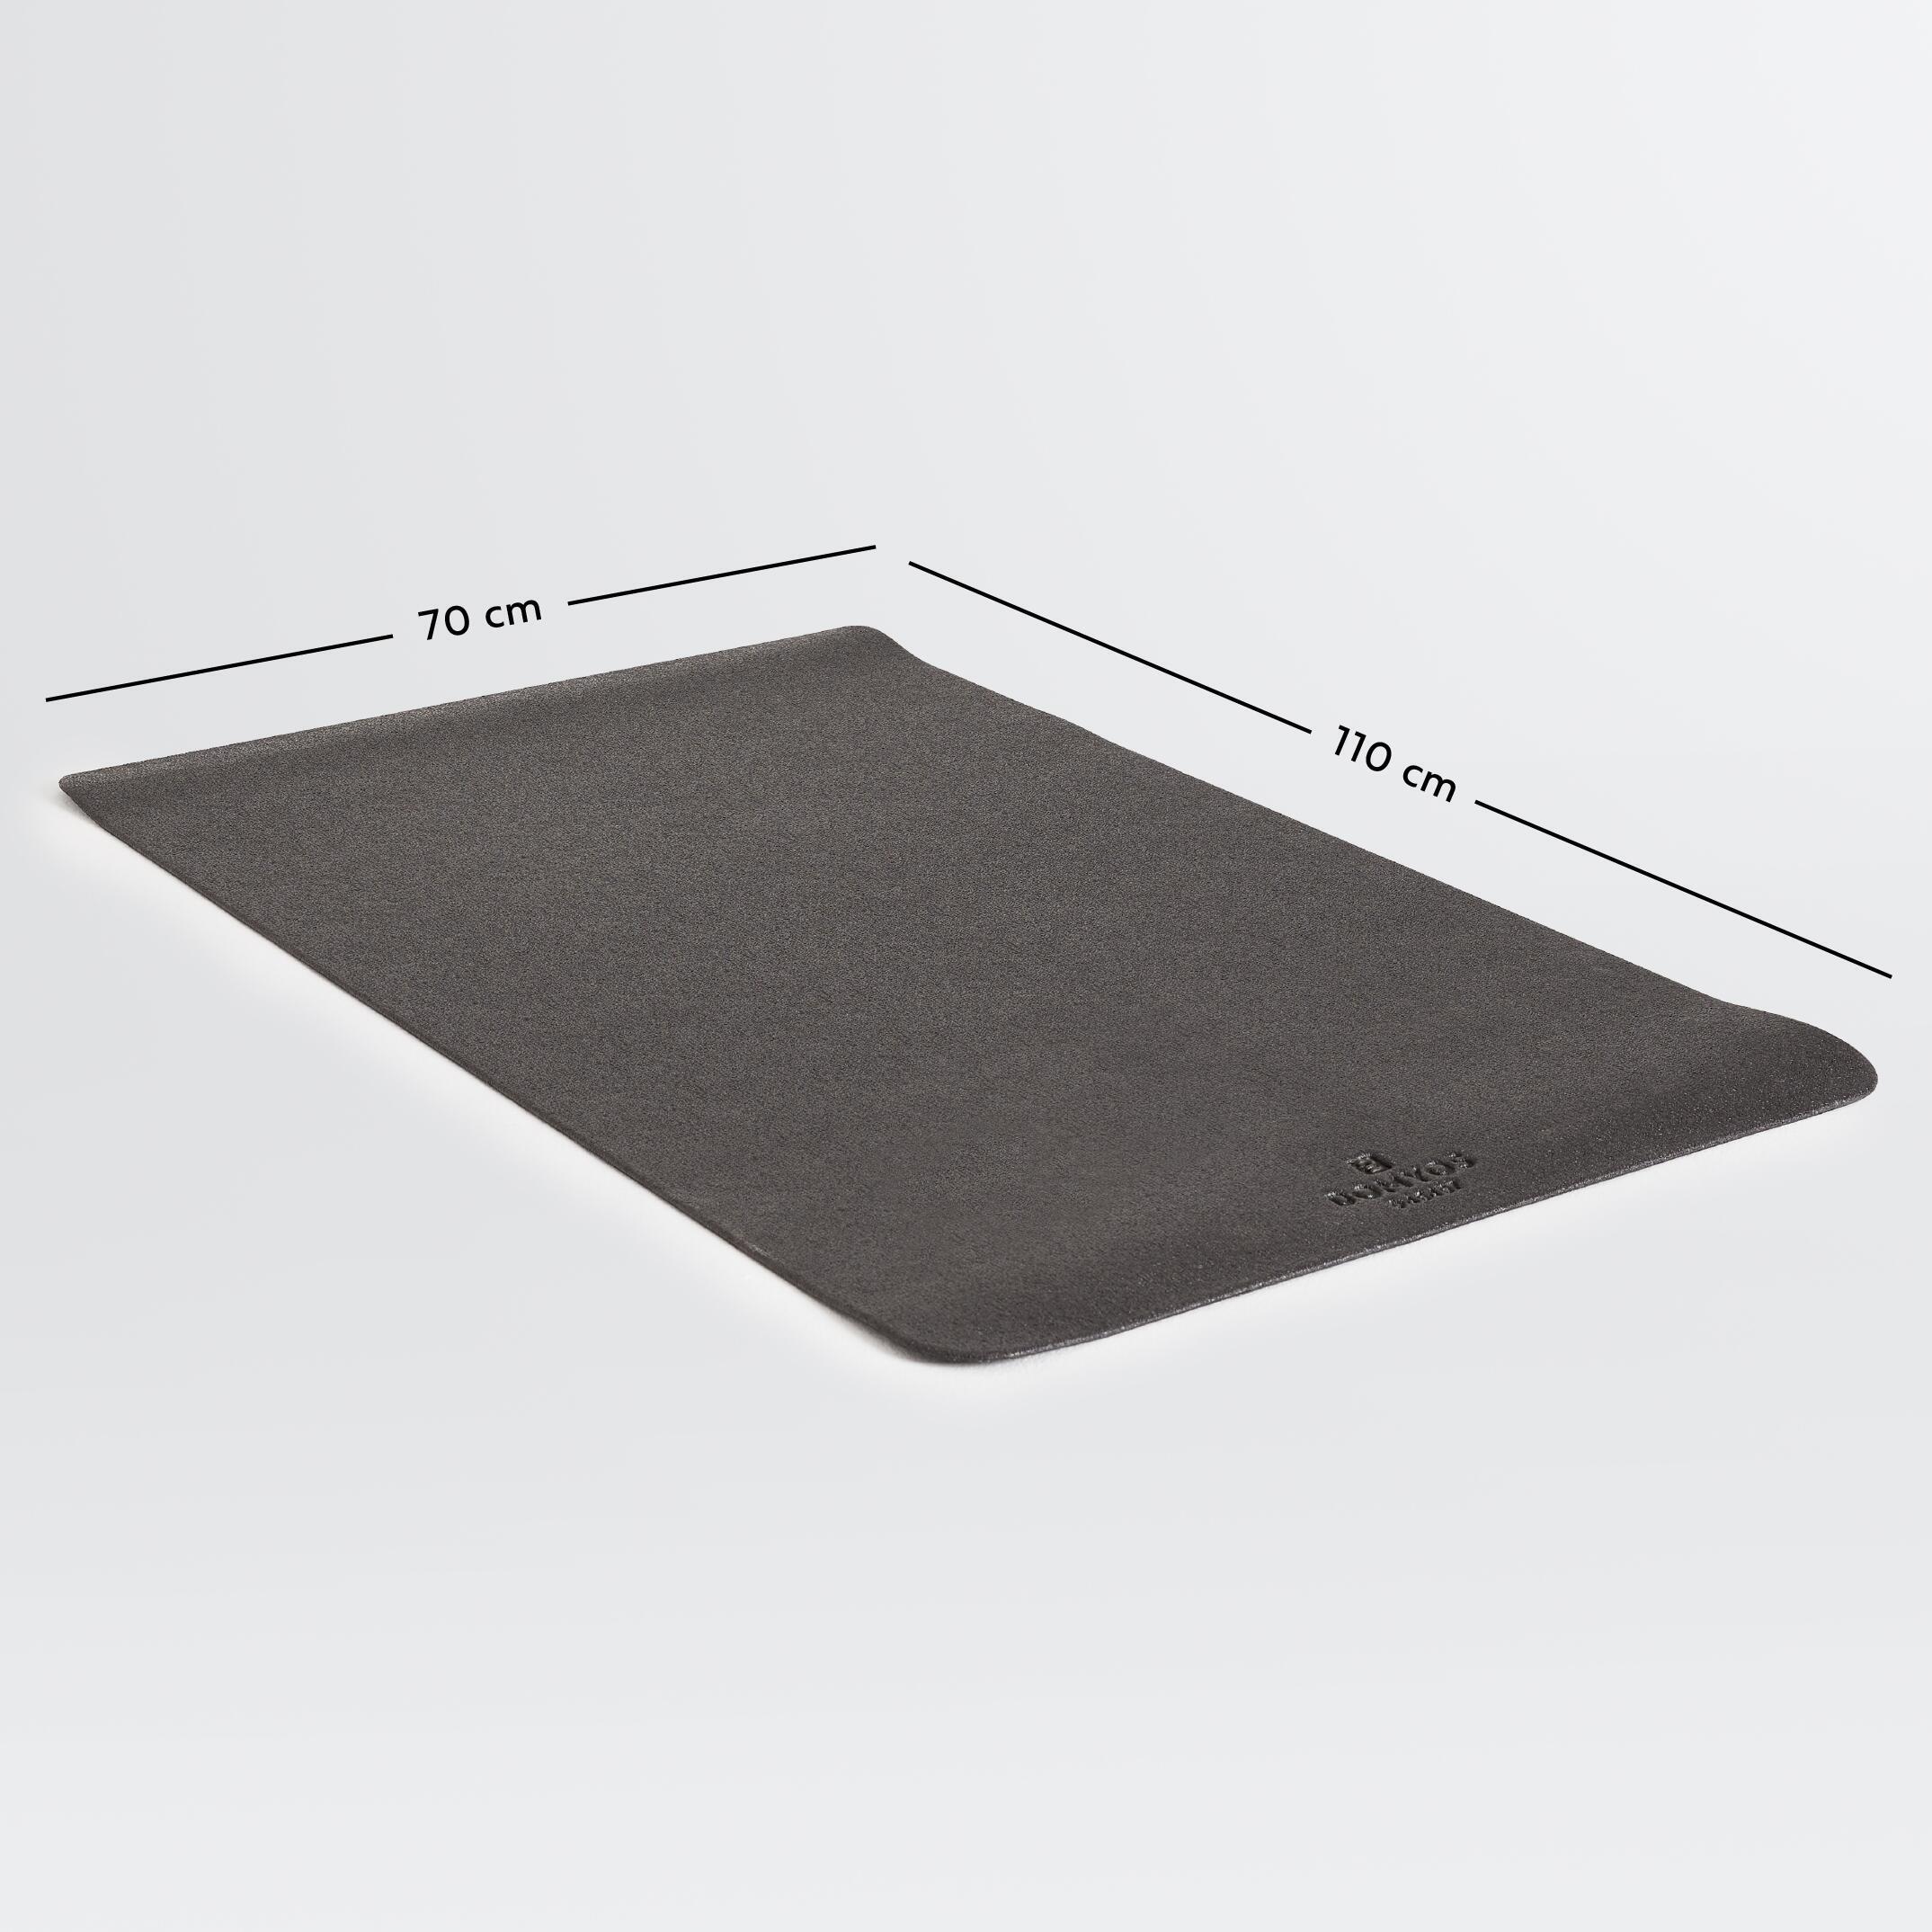 Floor Protection Mat for Fitness Equipment - Size M - 70x110 cm 1/4